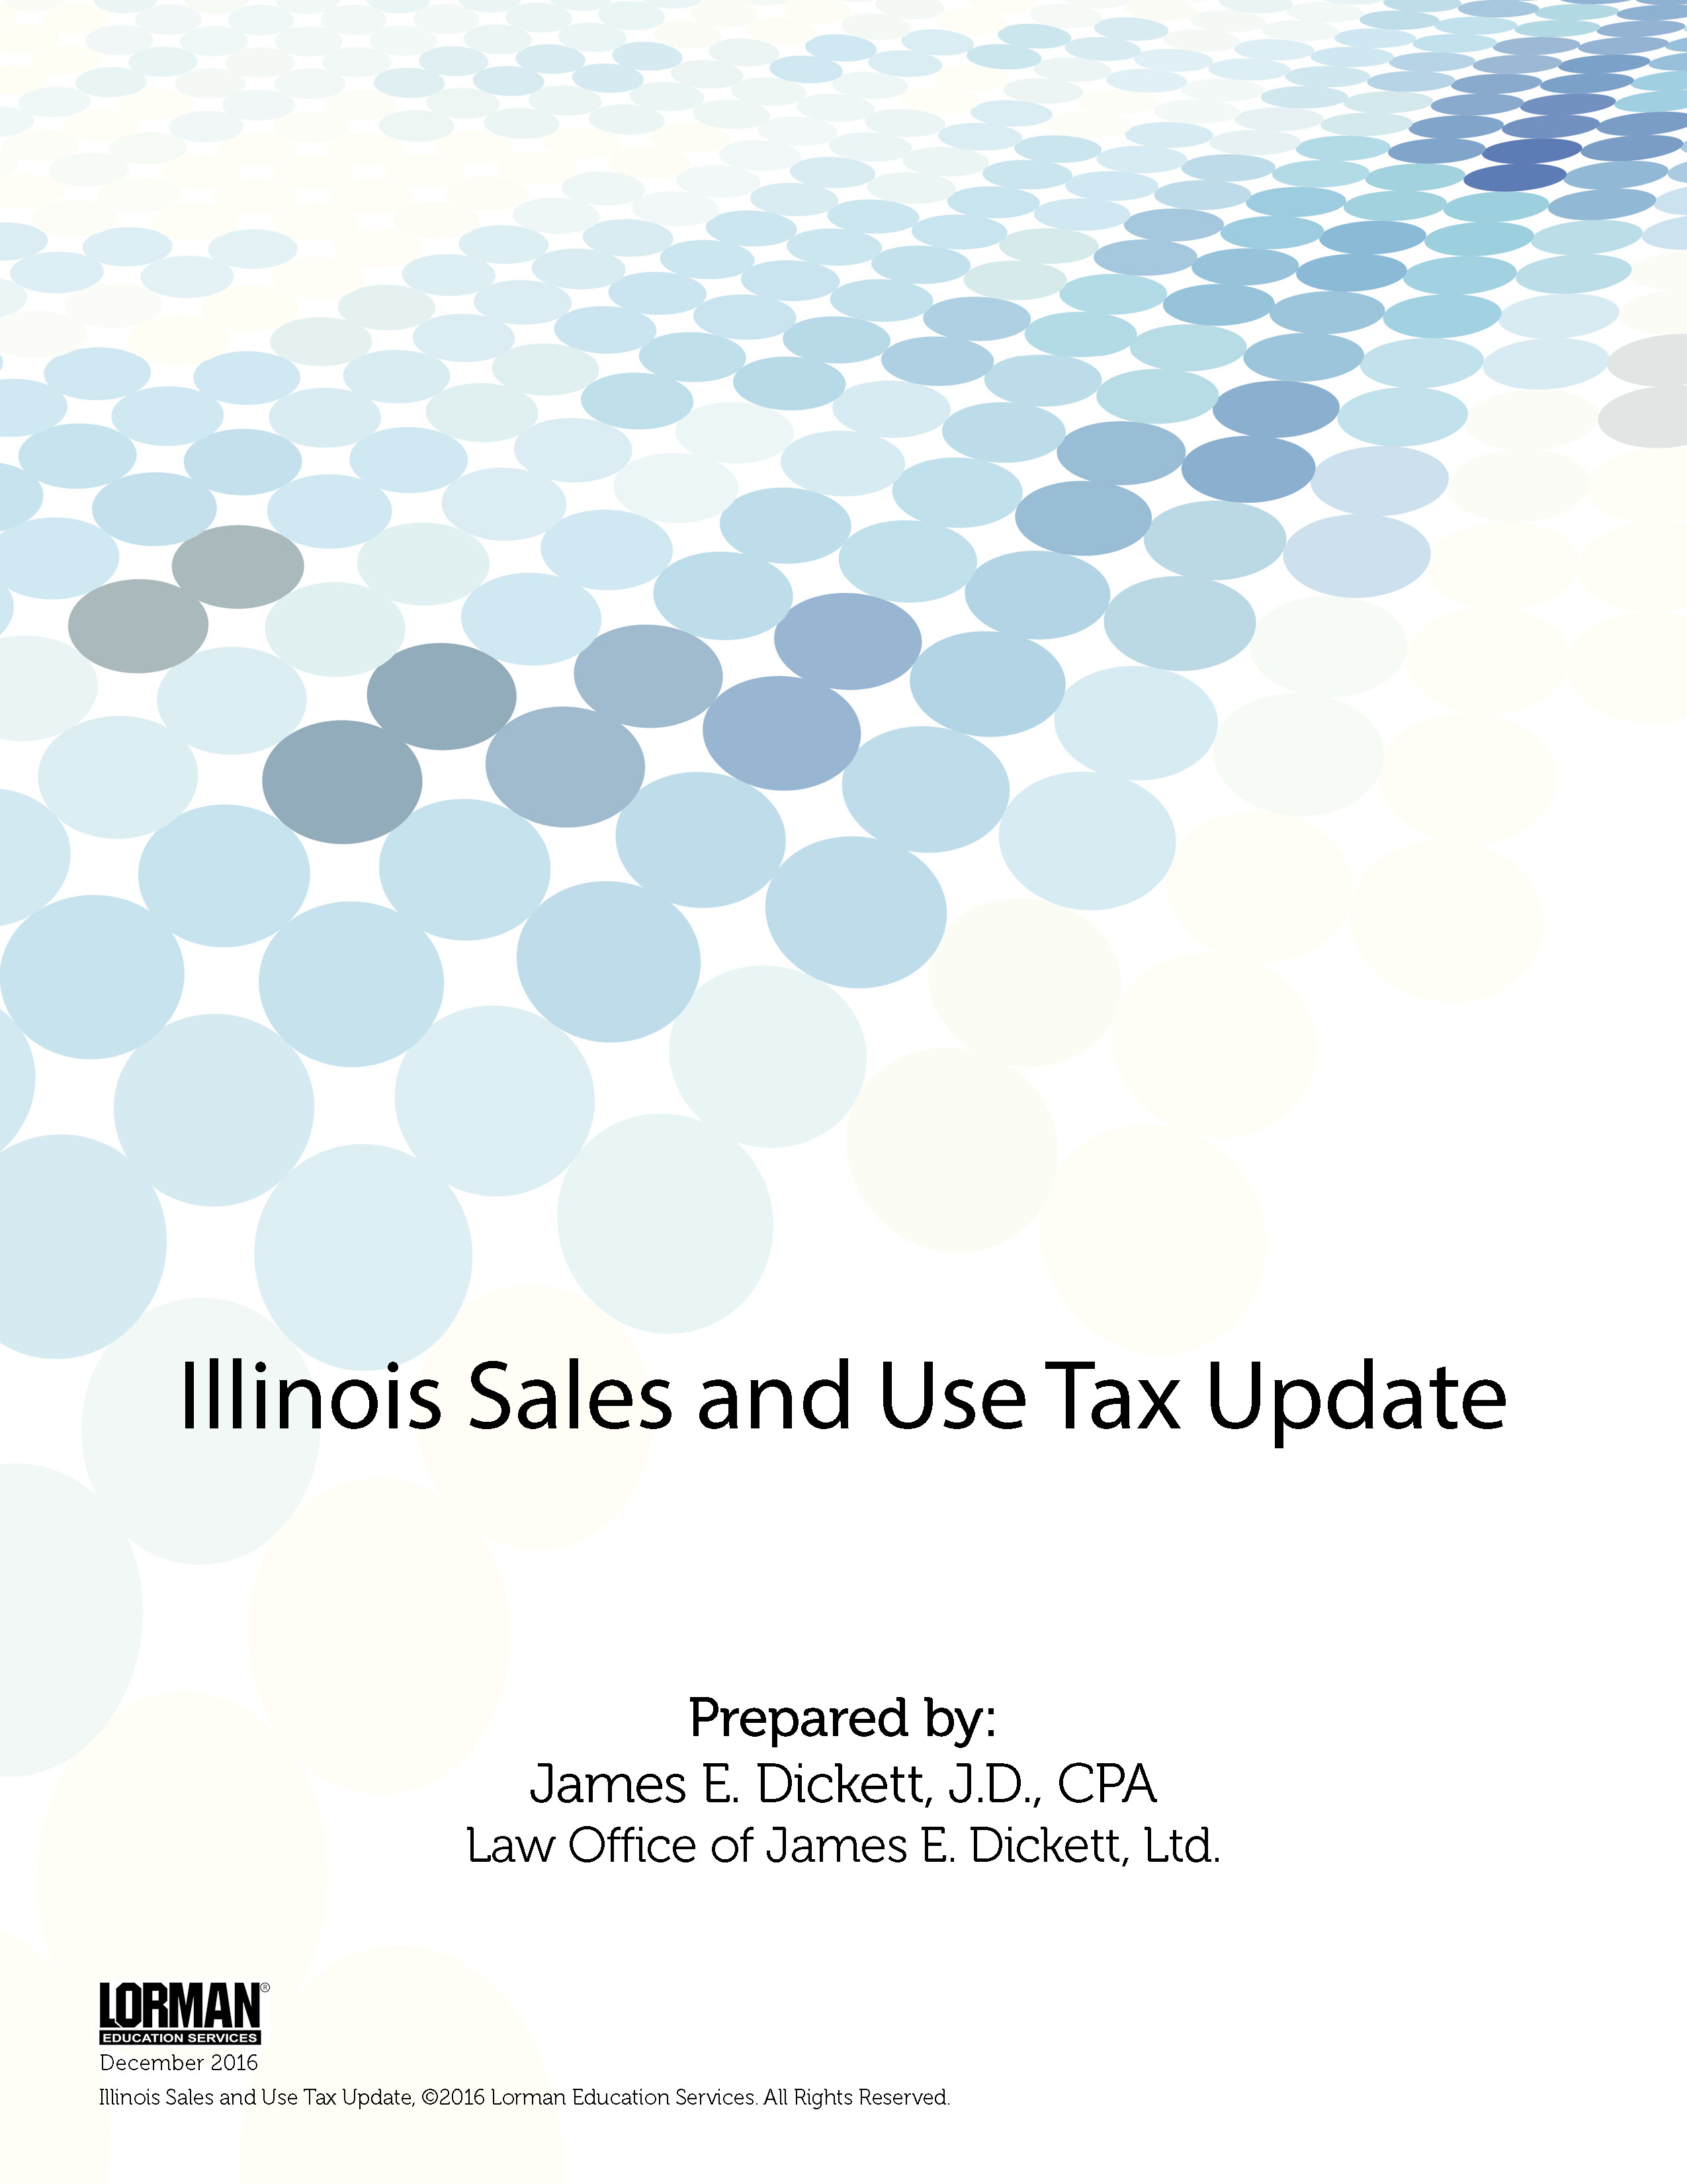 Illinois Sales and Use Tax Update